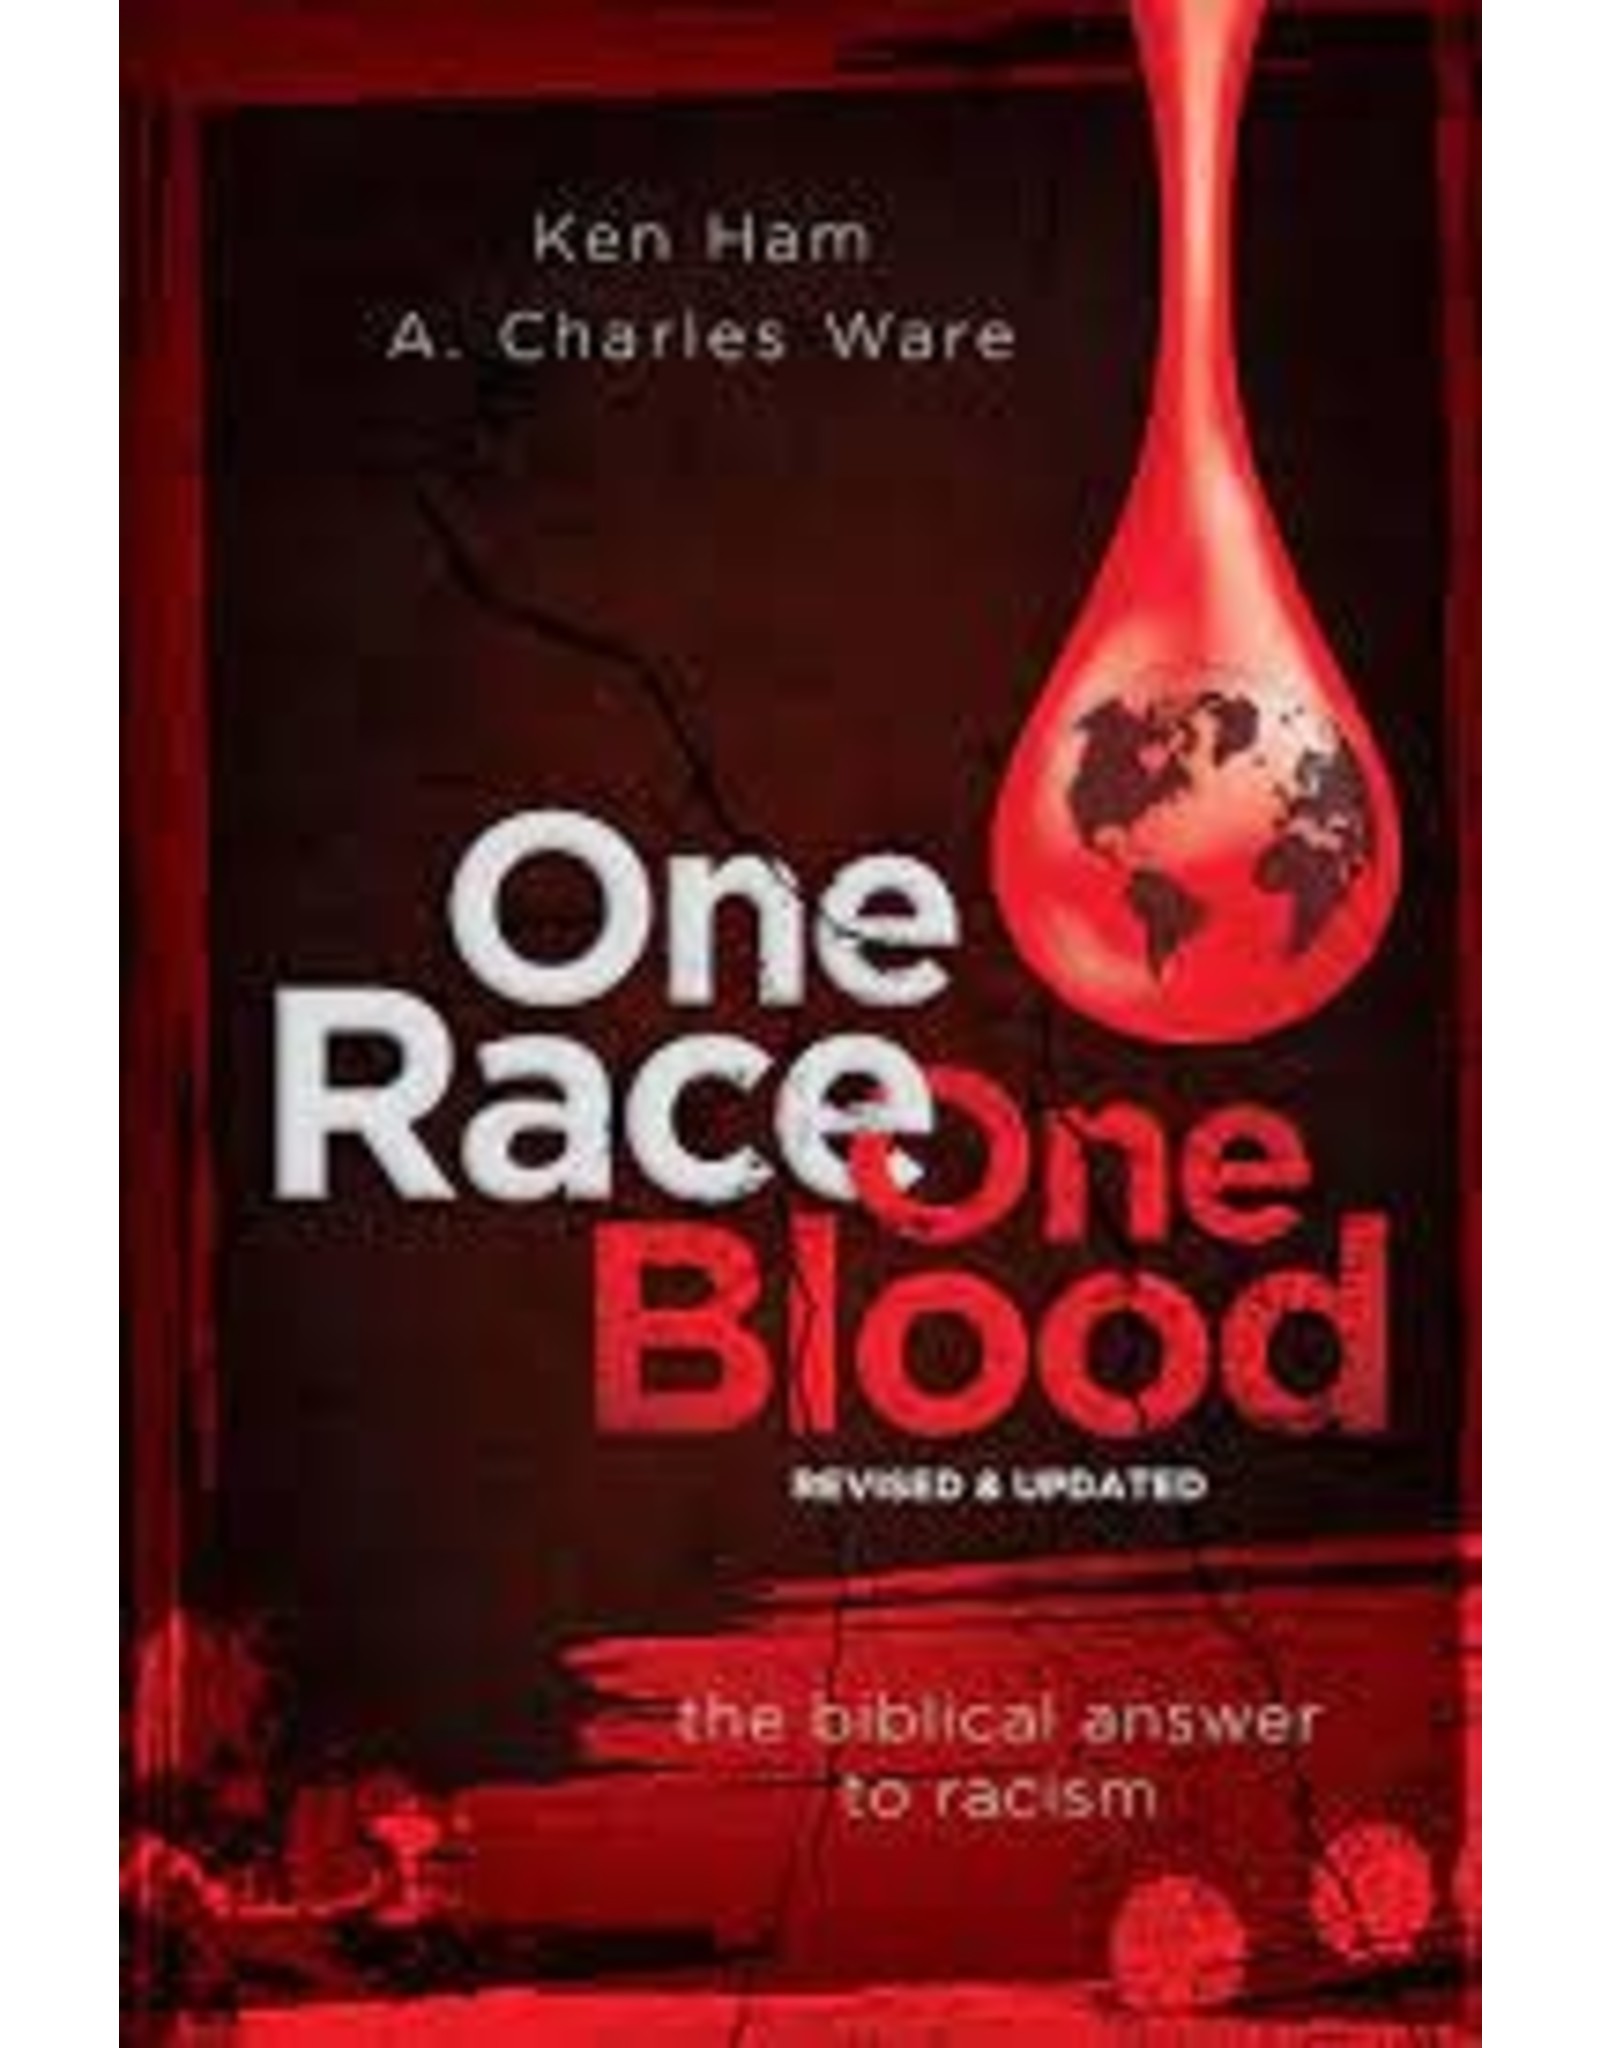 Ken Ham & A Charles Ware One Race One Blood: The Biblical Answer to Racism